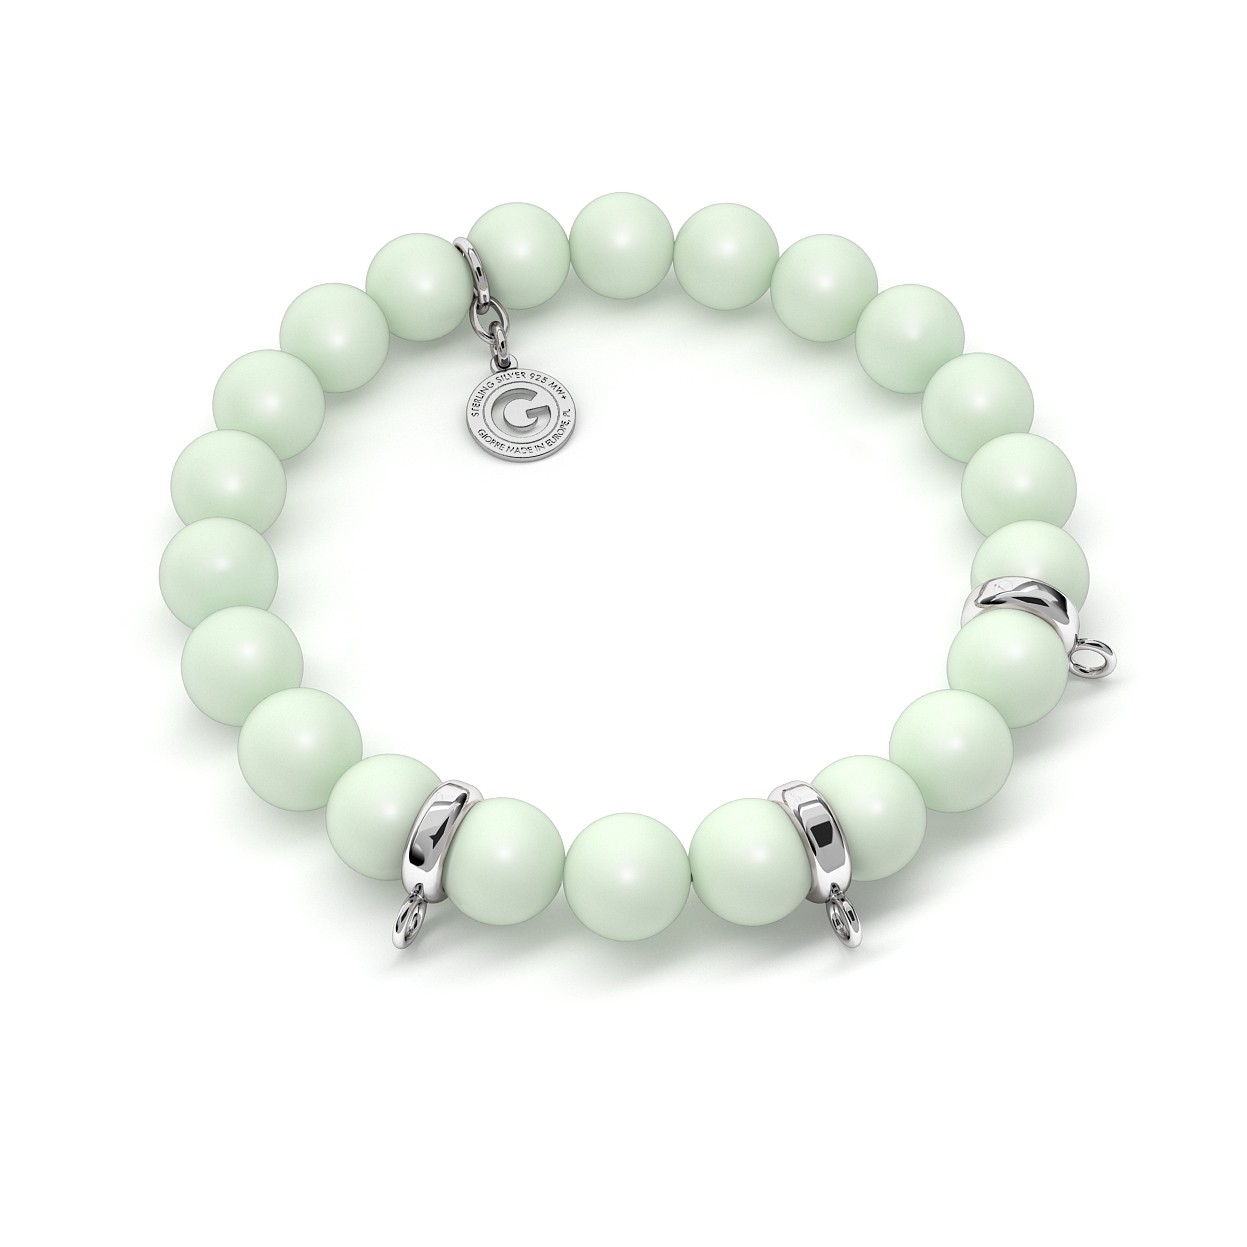 FLEXIBLE BRACELET WITH PEARLS (SWAROVSKI PEARL) FOR 3 CHARMS, SILVER 925, RHODIUM OR GOLD PLATED